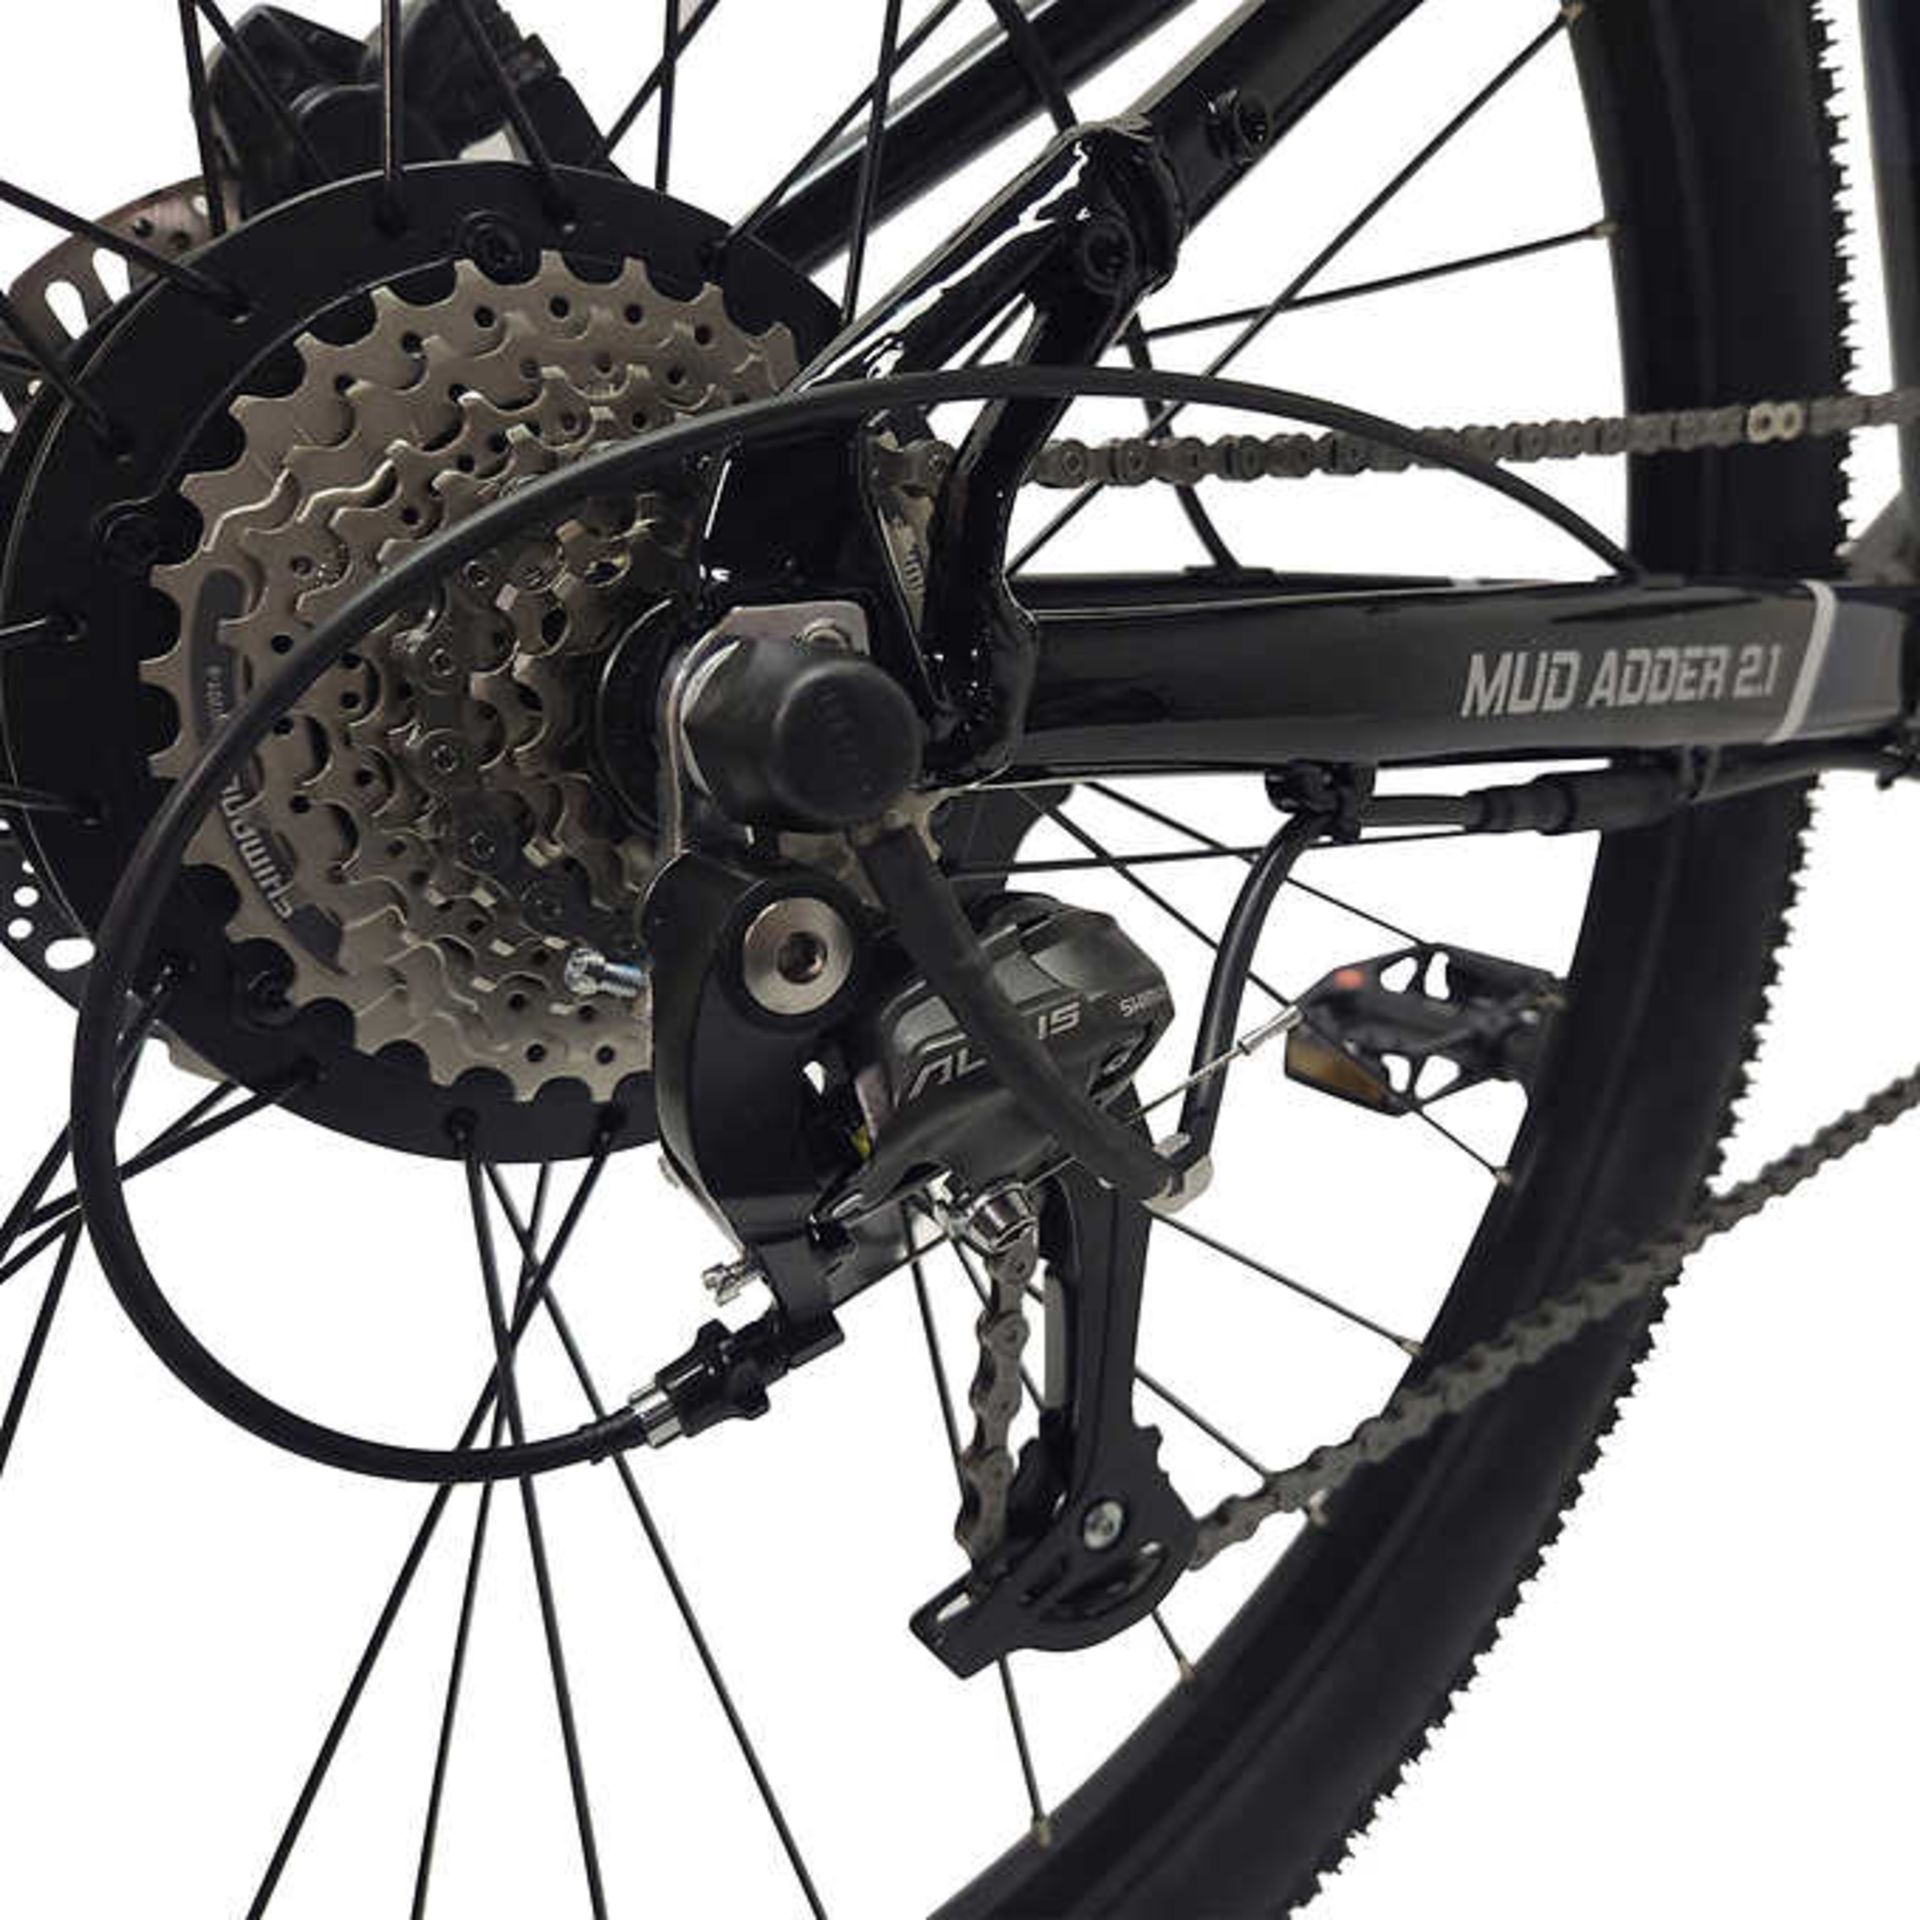 SPORTS MUD ADDER 2.1 TOUGH & RUGGED ELECTRIC MOUNTAIN BIKE (MSRP $2,700) - Image 4 of 6